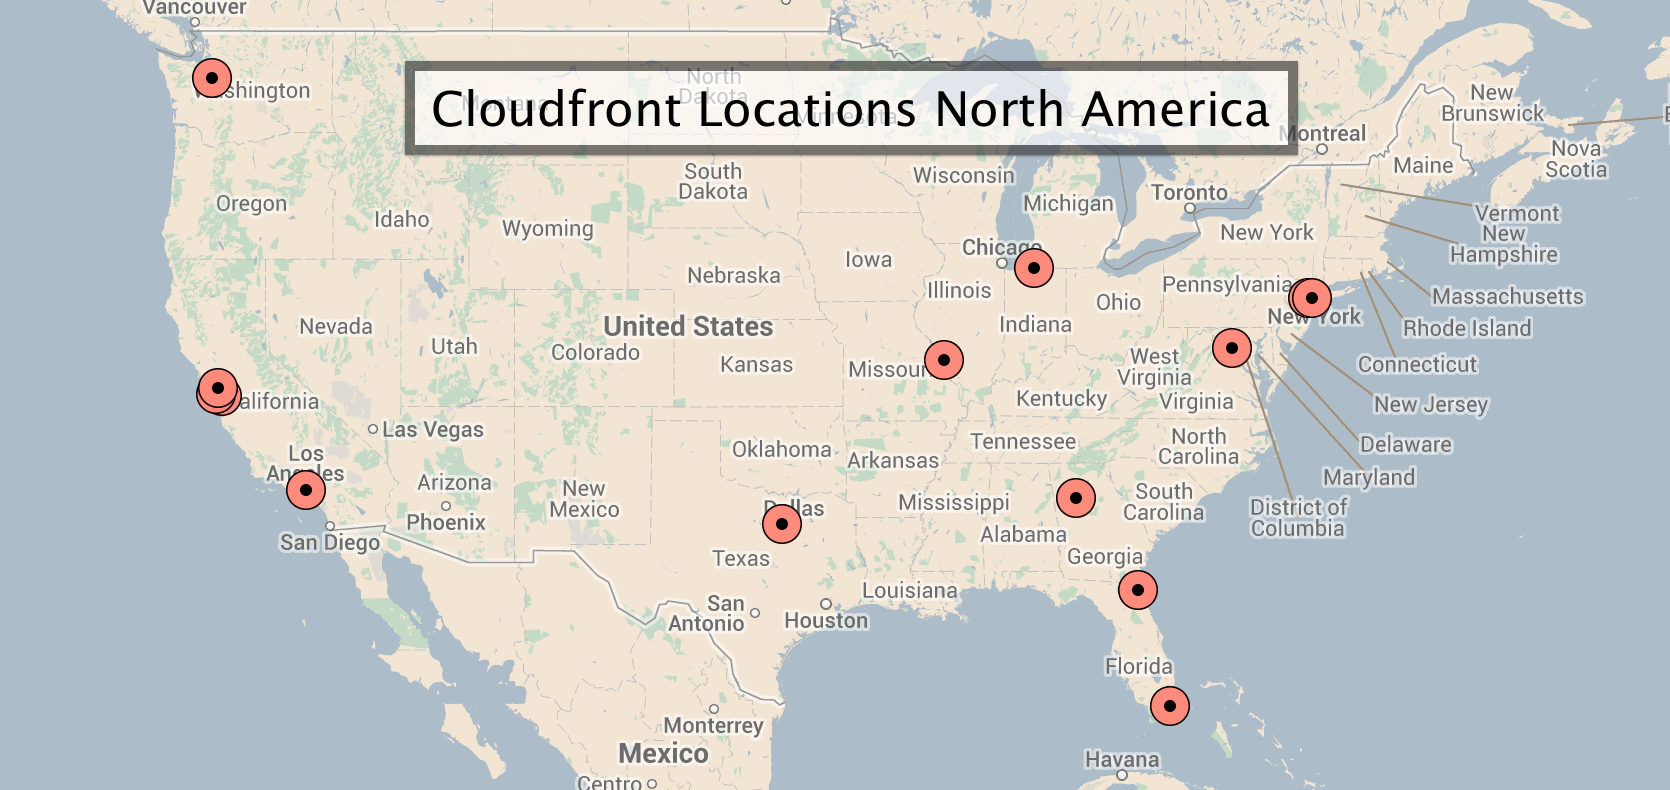 CloudFront Locations in North America as of 2014-06-15